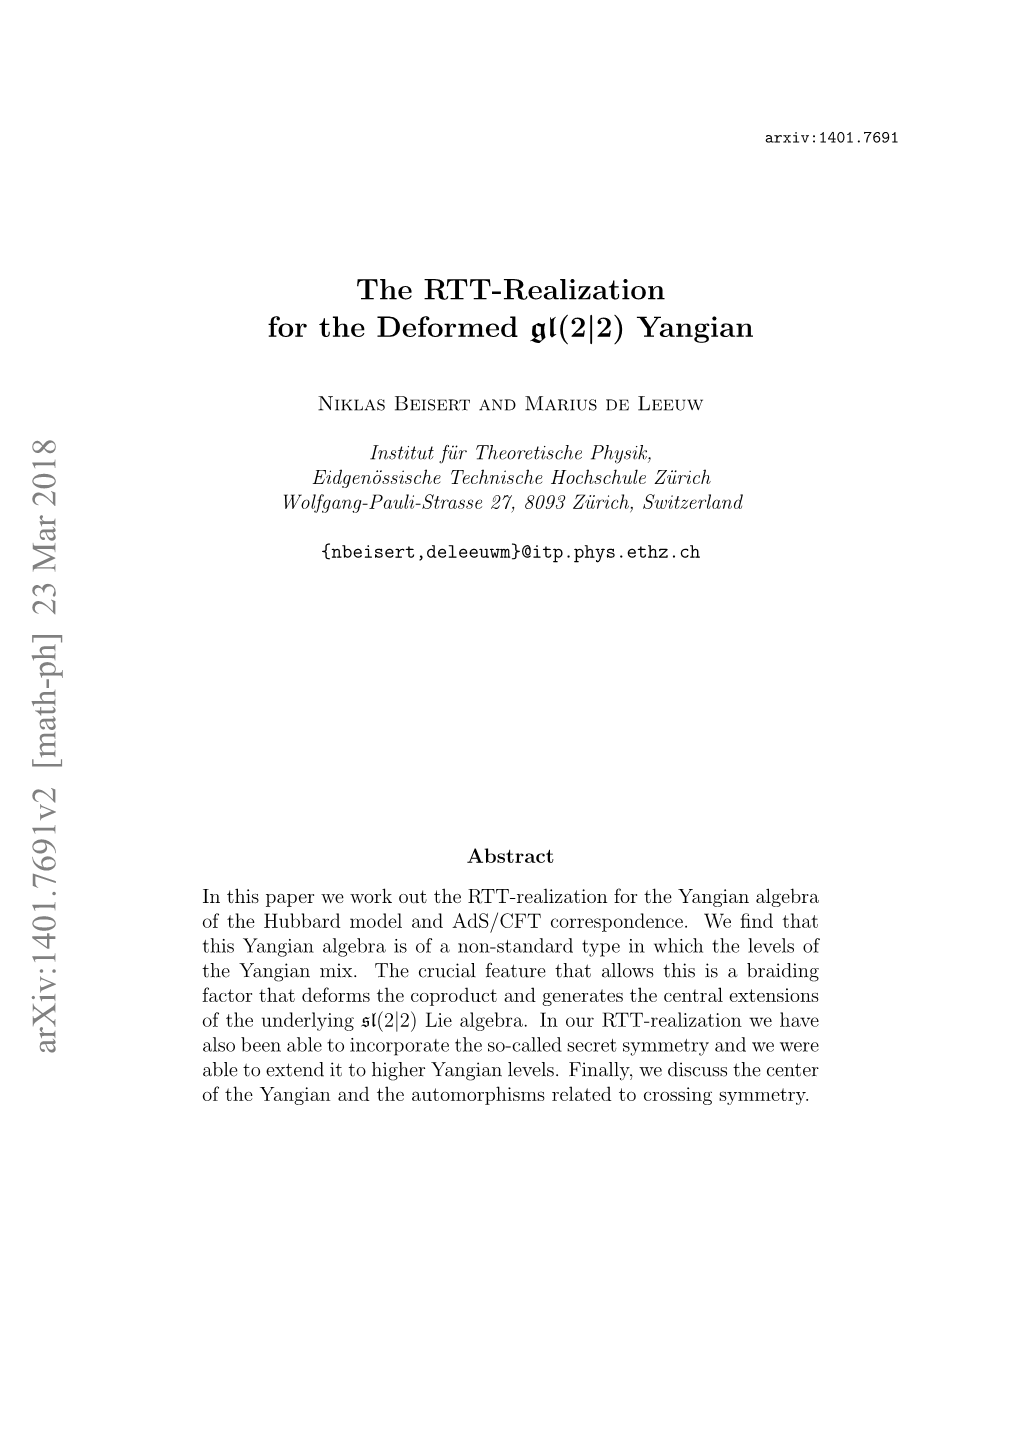 The RTT-Realization for the Deformed Gl(2|2) Yangian